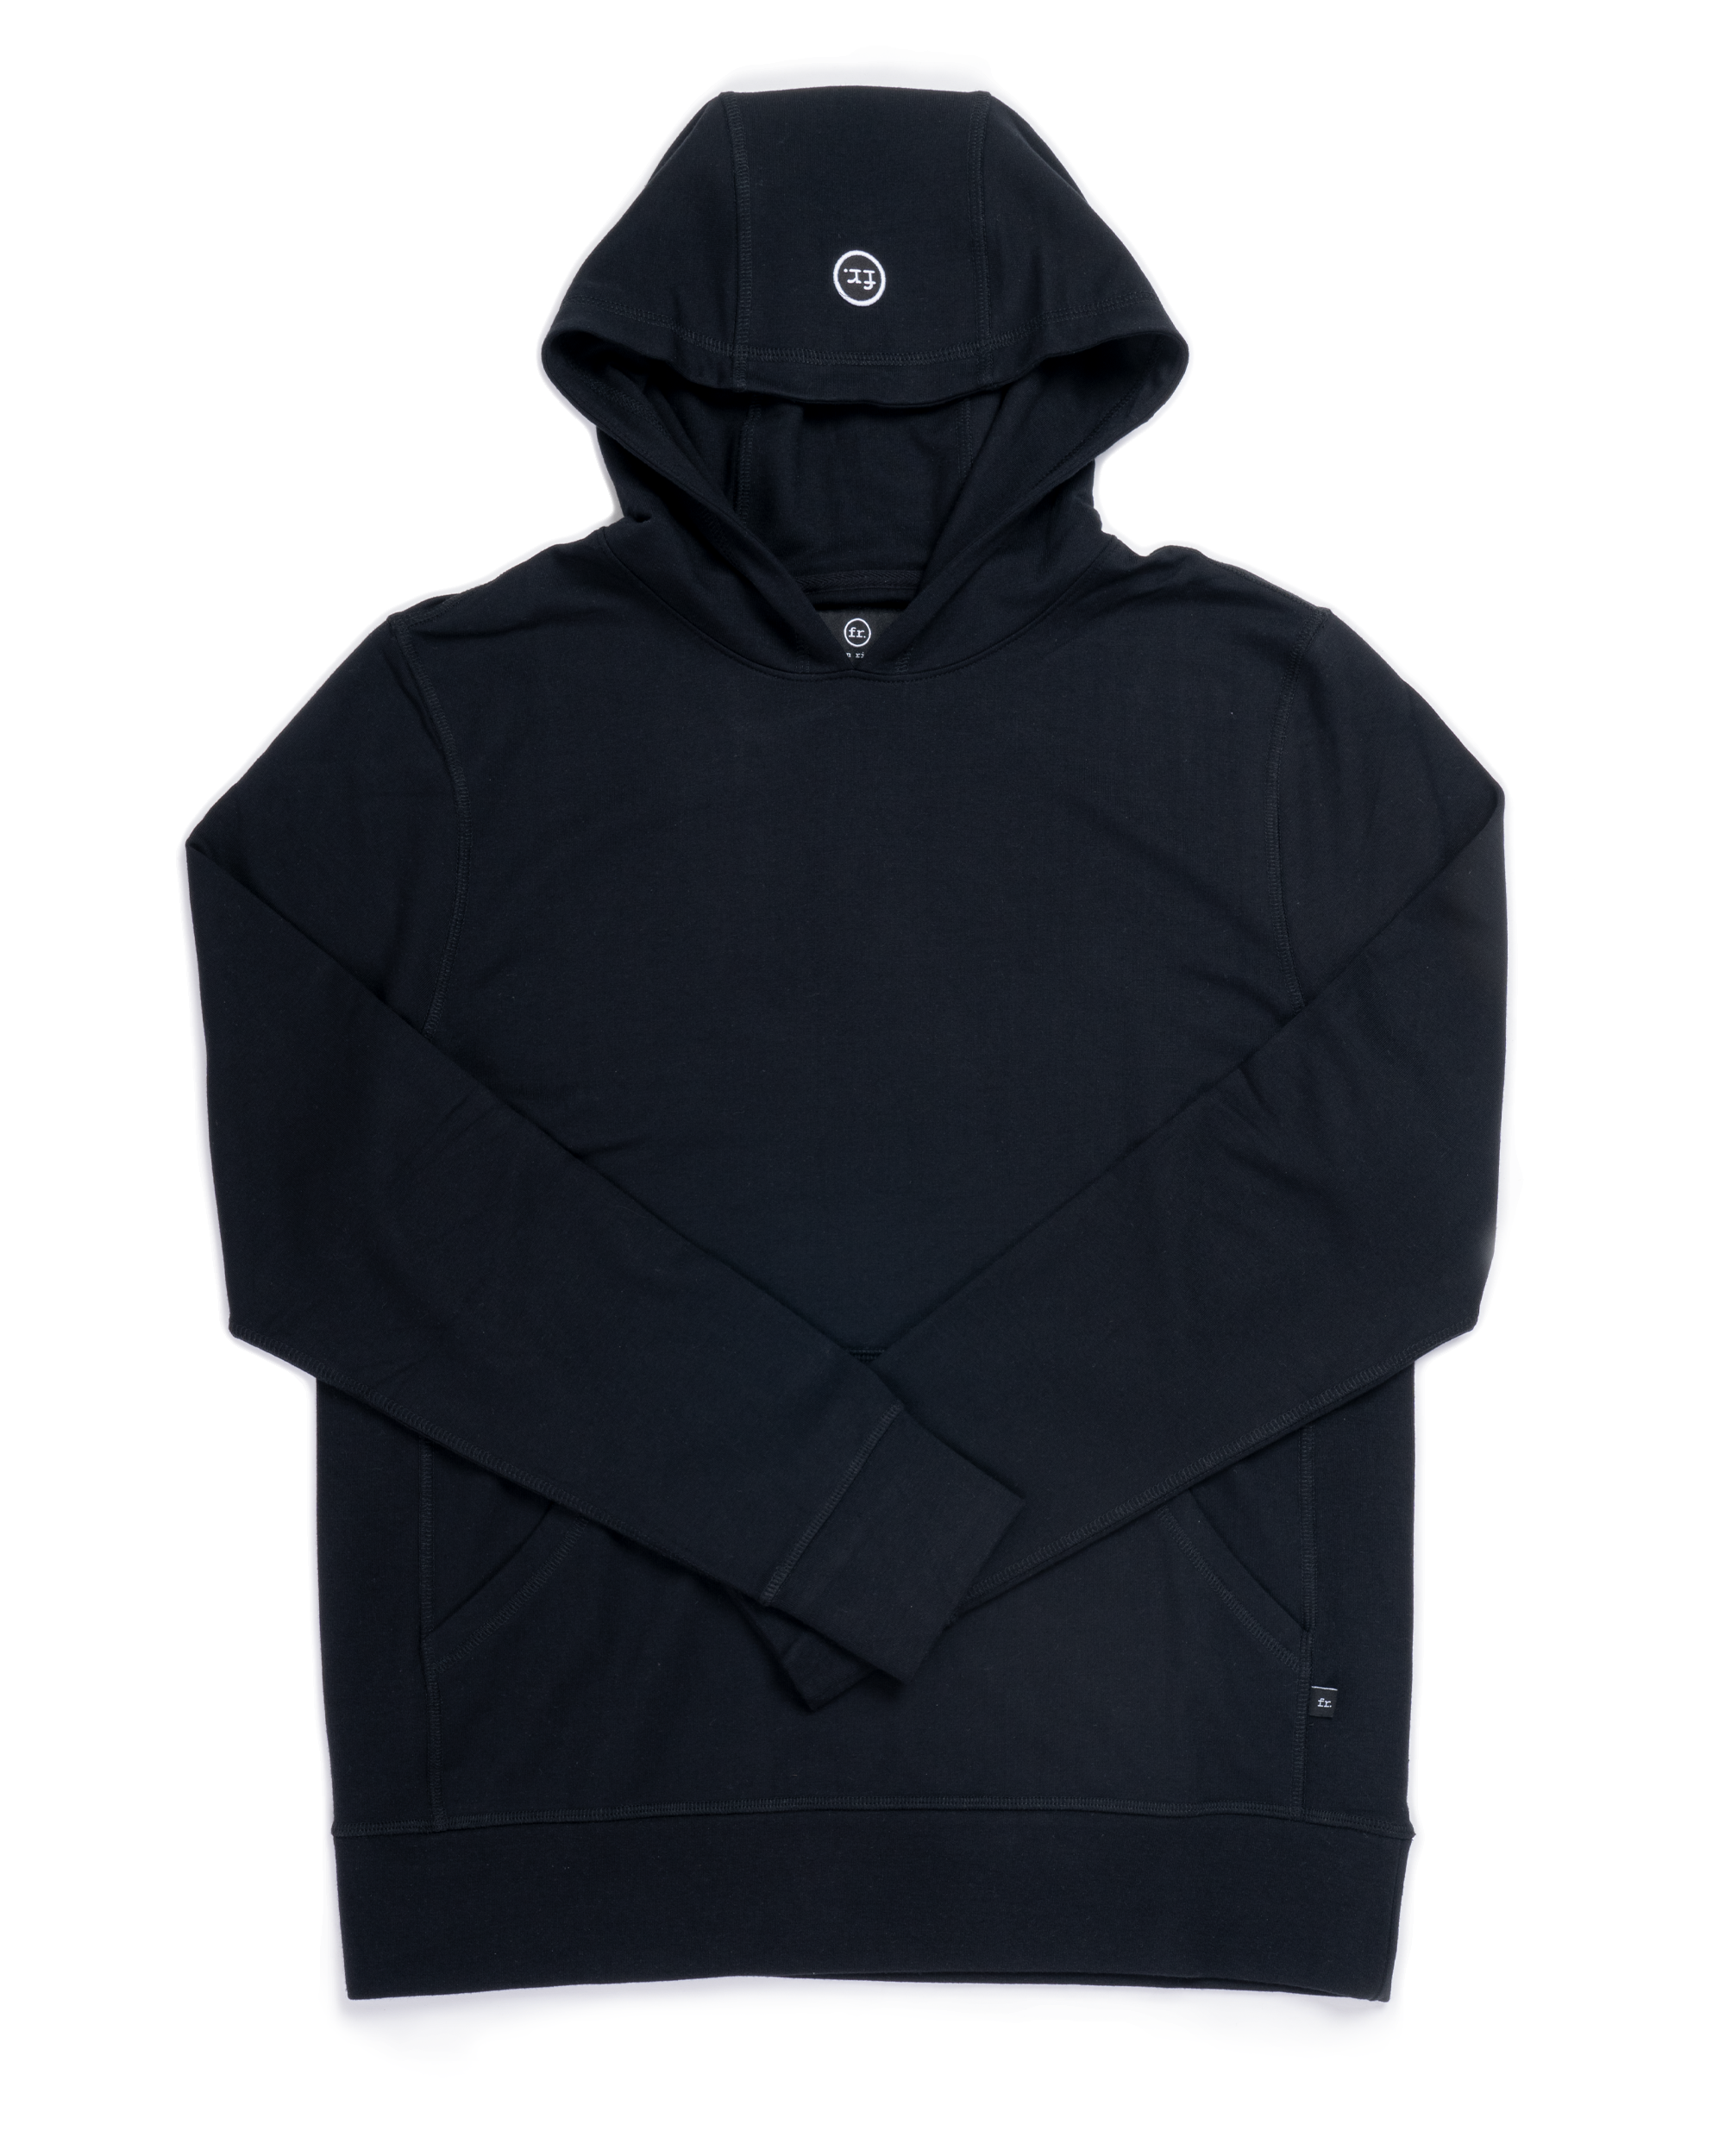 Performance Hooded Pullover Black - Foreign Rider Co.